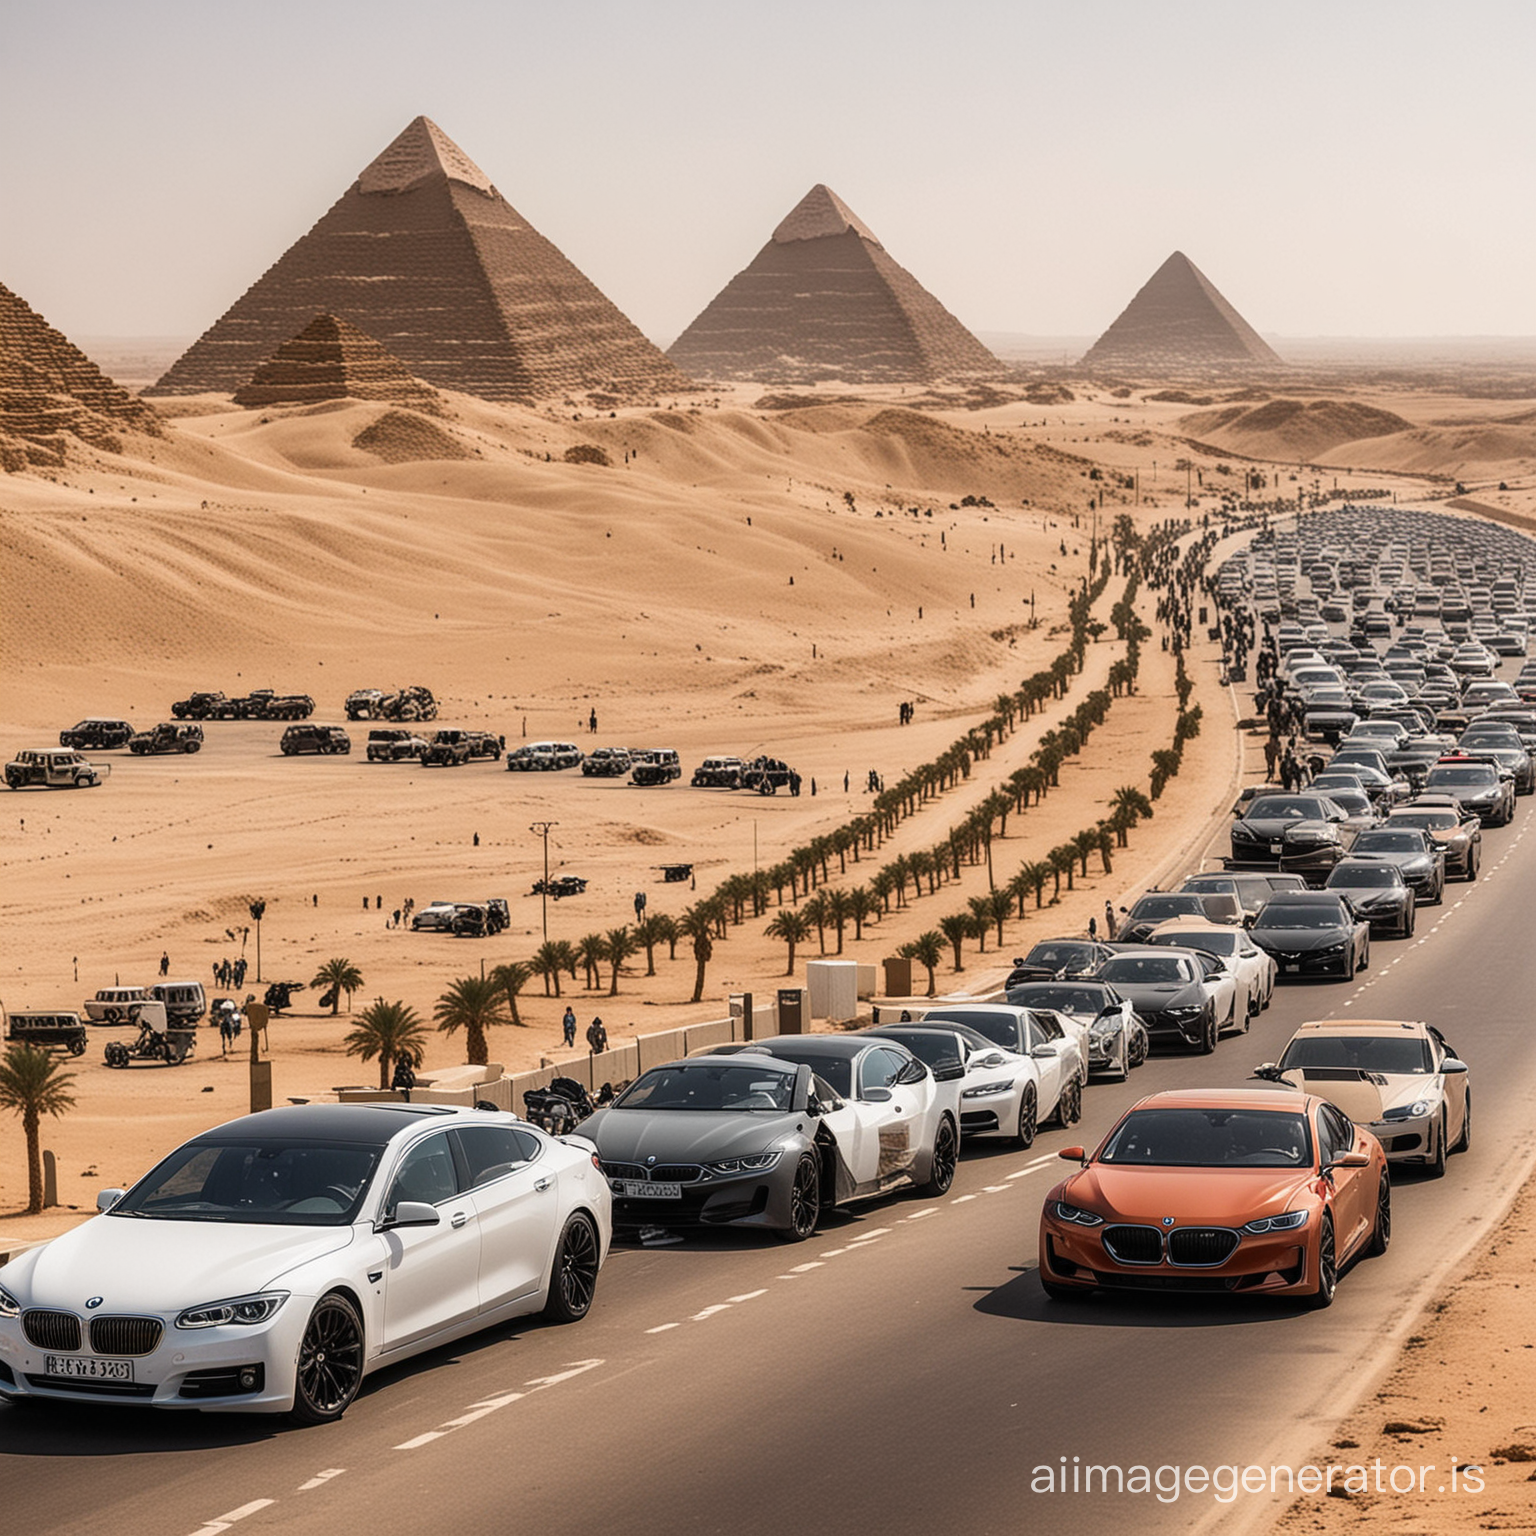 Exodus from ancient Egypt in the 21st century with thousands of BMW's teslas and other luxury cars driving down the road with pyramids in the background and the Egyptian army in pursuit 